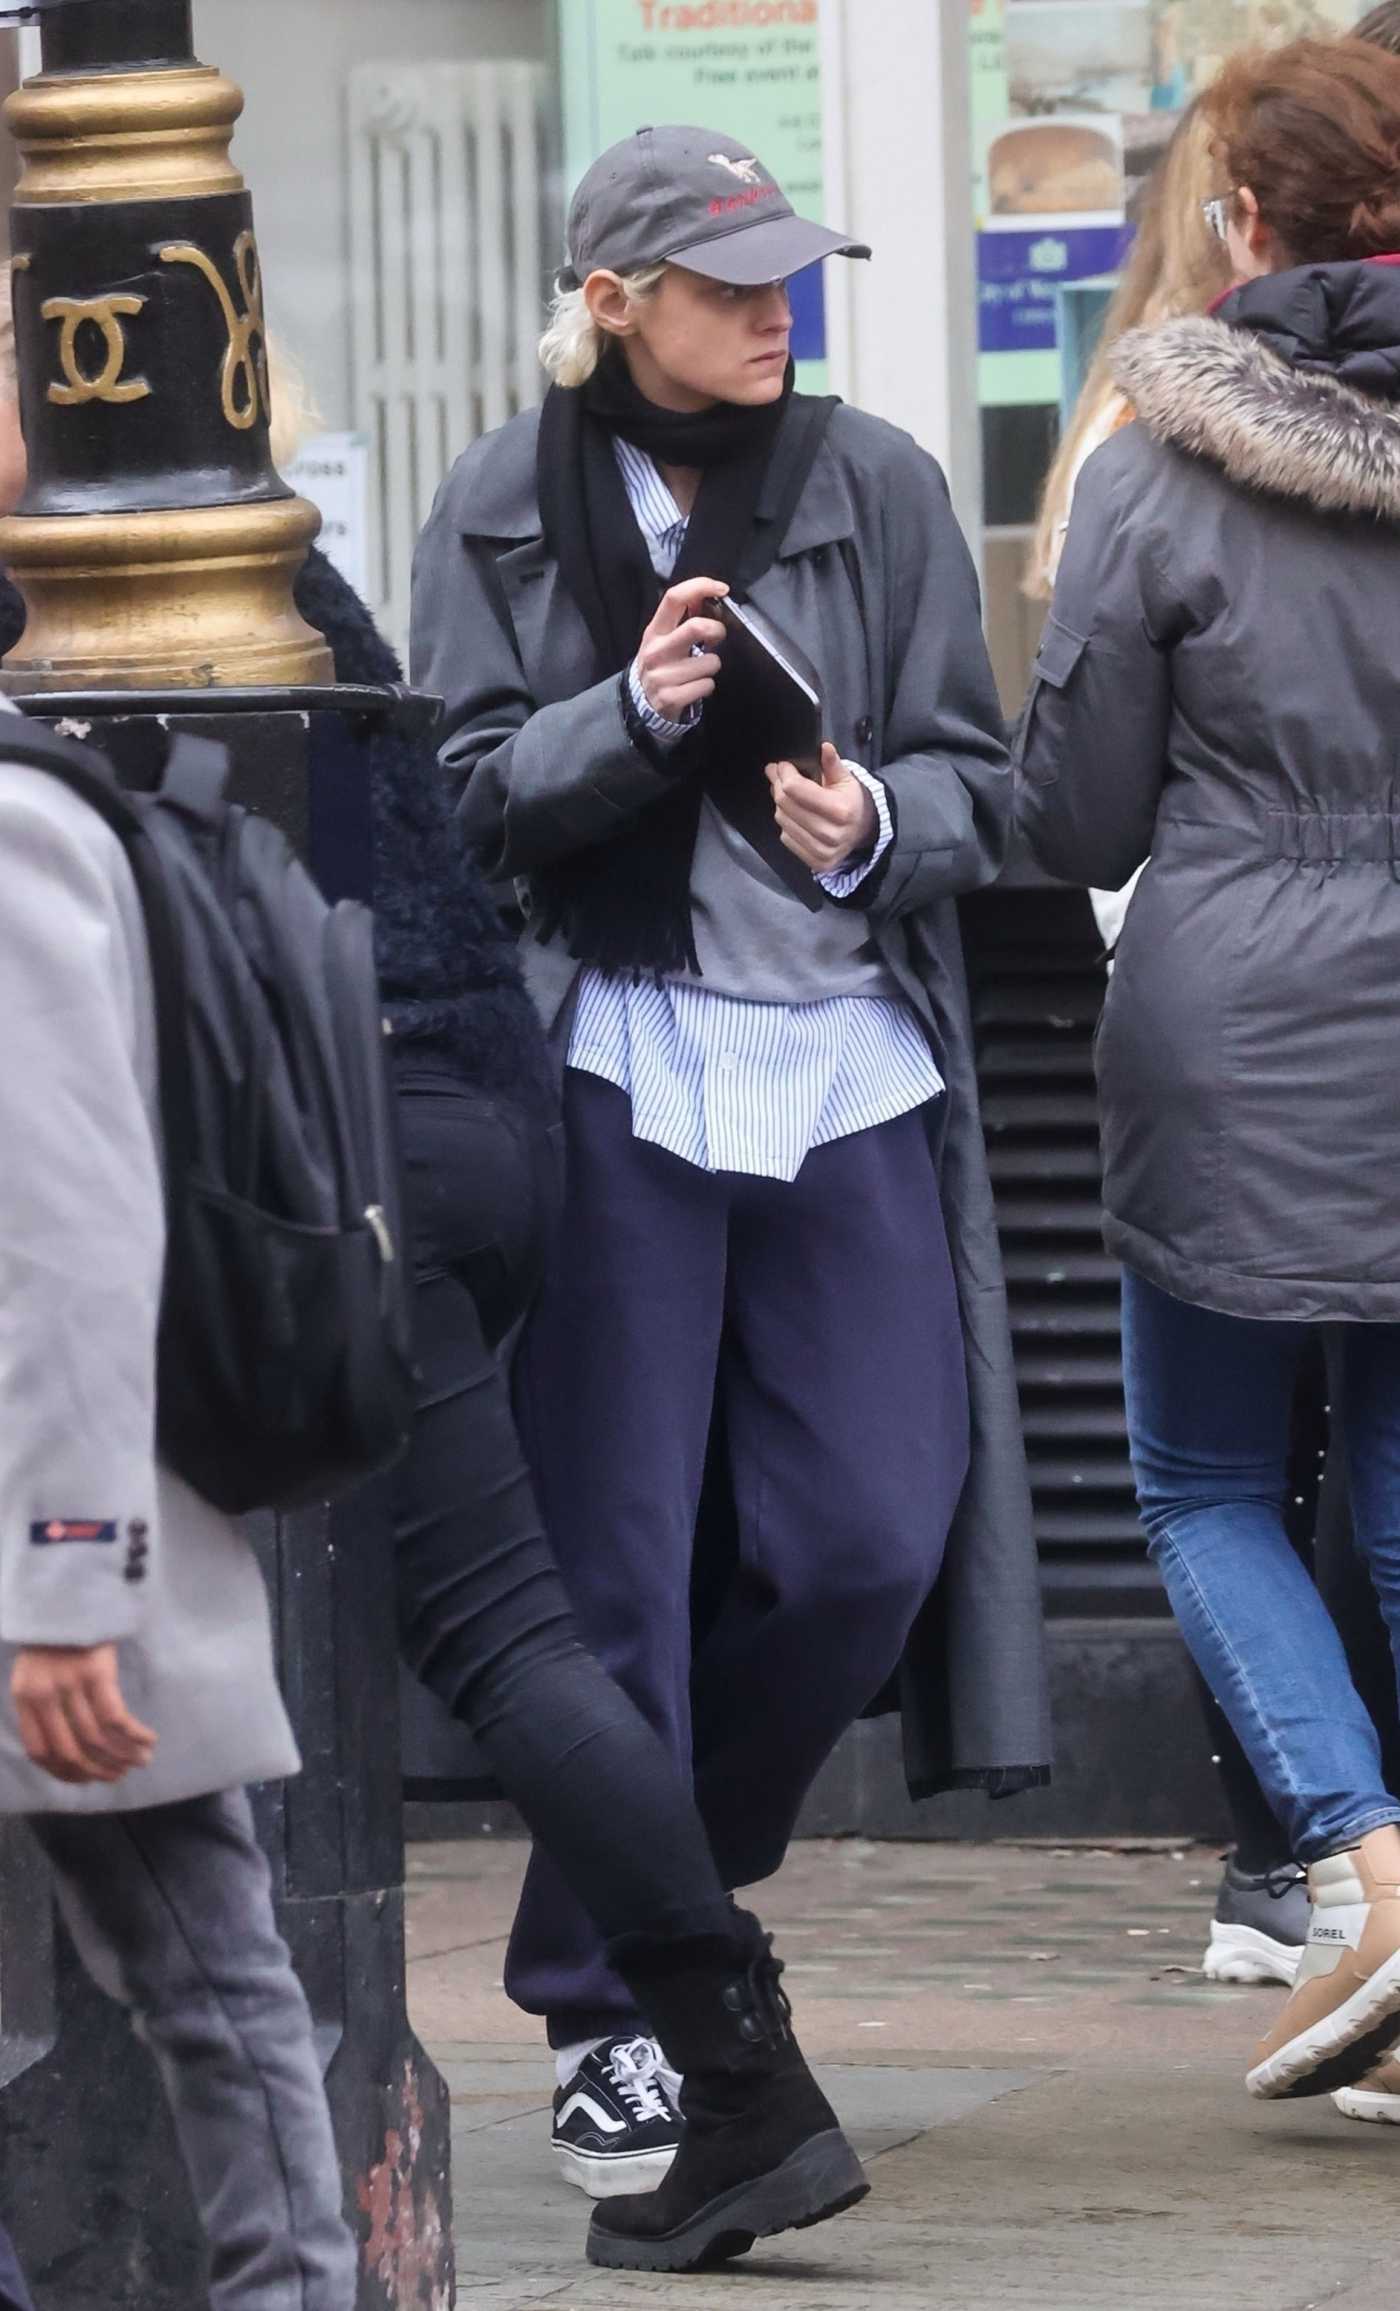 Emma Corrin in a Grey Cap Was Seen Out in Central London 01/04/2023